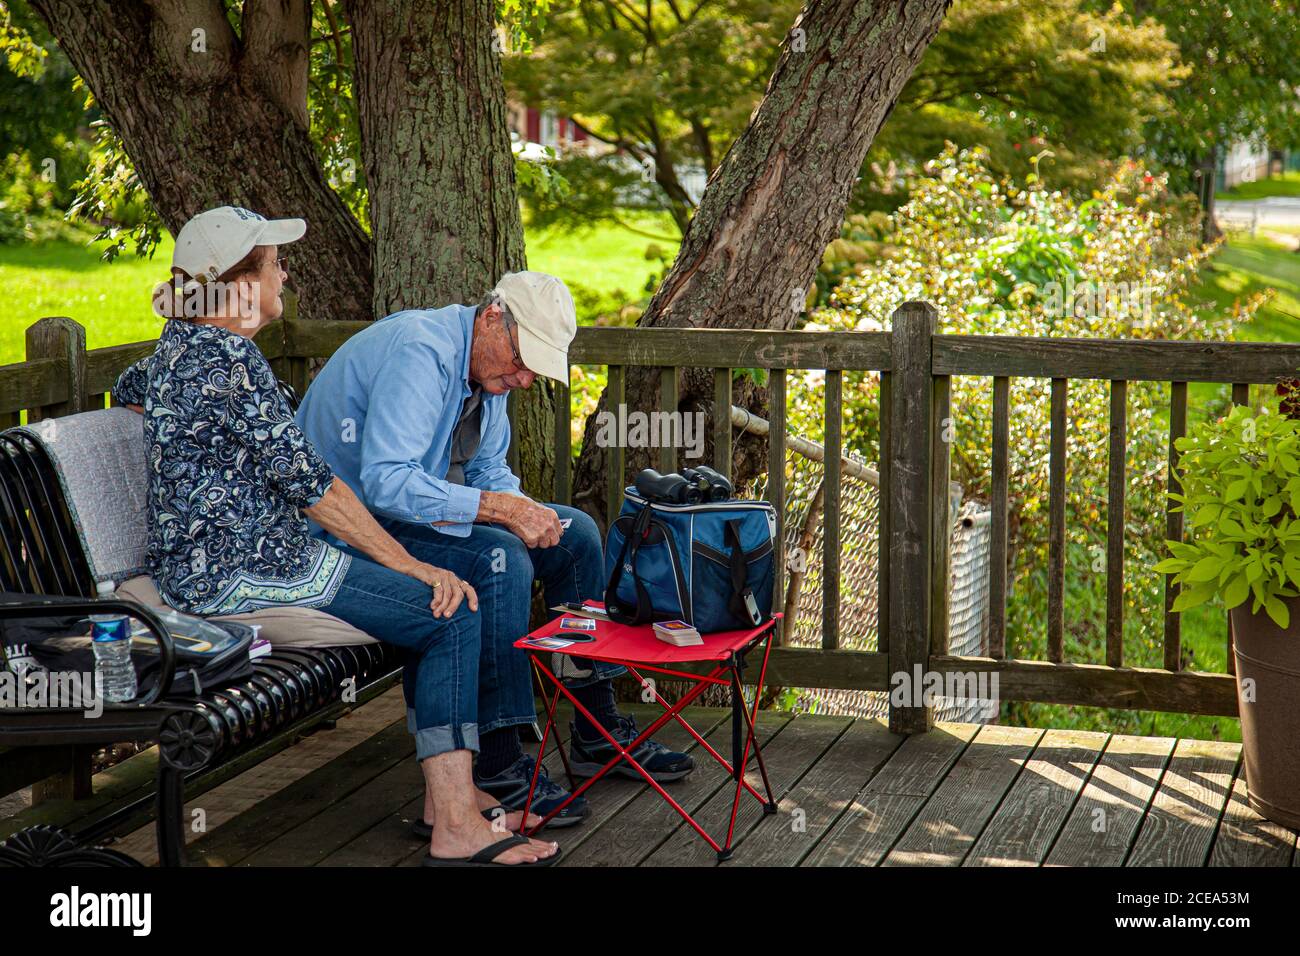 Chesapeake City, MD, USA 08/25/2020: An elderly caucasian couple wearing baseball hats shirts and jeans is sitting on pillows on a metal park bench in Stock Photo